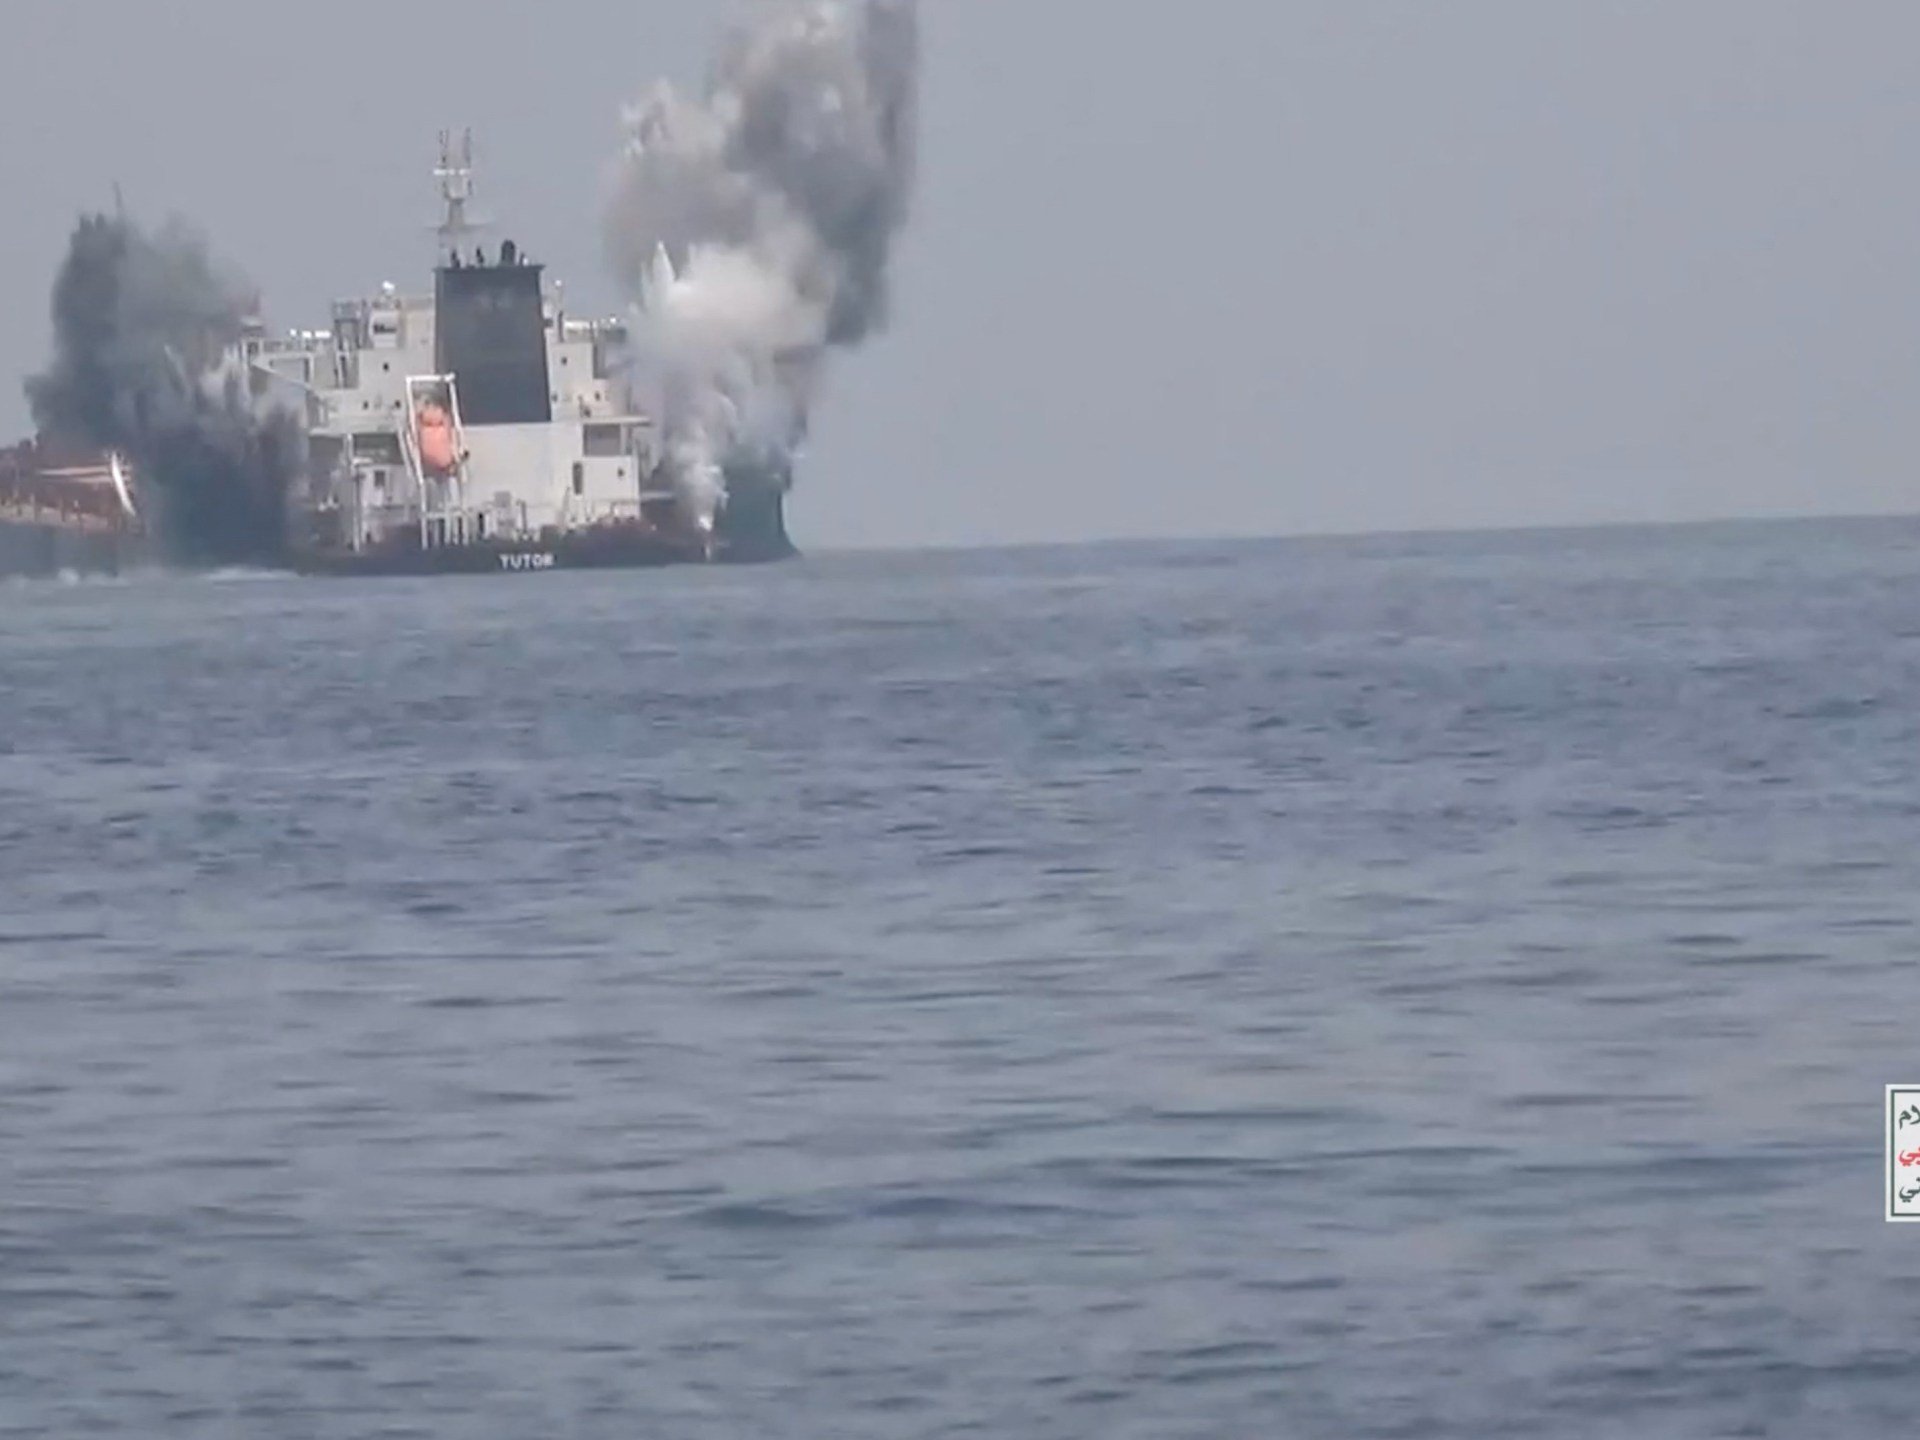 Houthis claim attack on ship that docked in Israel